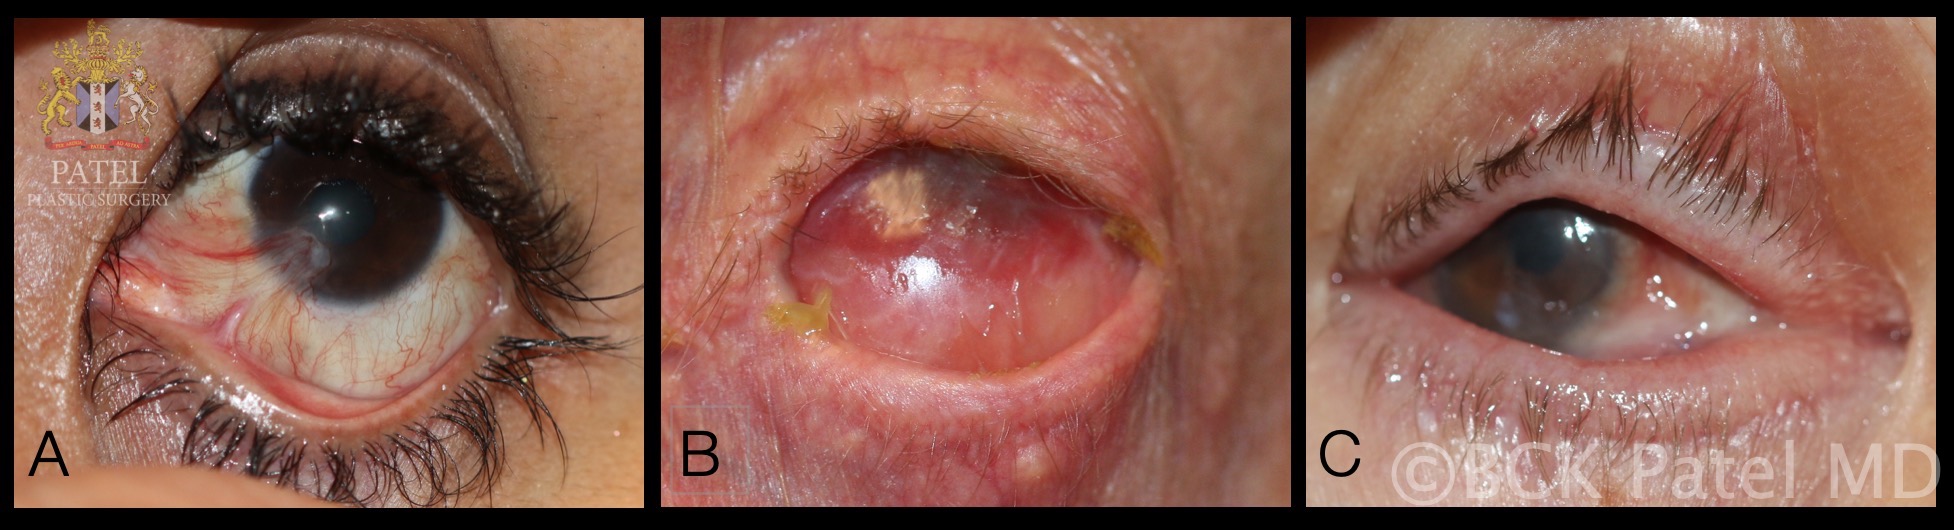 A. Punctal stenosis caused by a chemical burn with conjunctival and lid margin muco-cutaneous junction scarring
B. Complete obliteration of the puncta secondary to cicatrization caused by Stevens Johnson syndrome
C. Punctal occlusion in the presence of mucous membrane pemphigoid disease